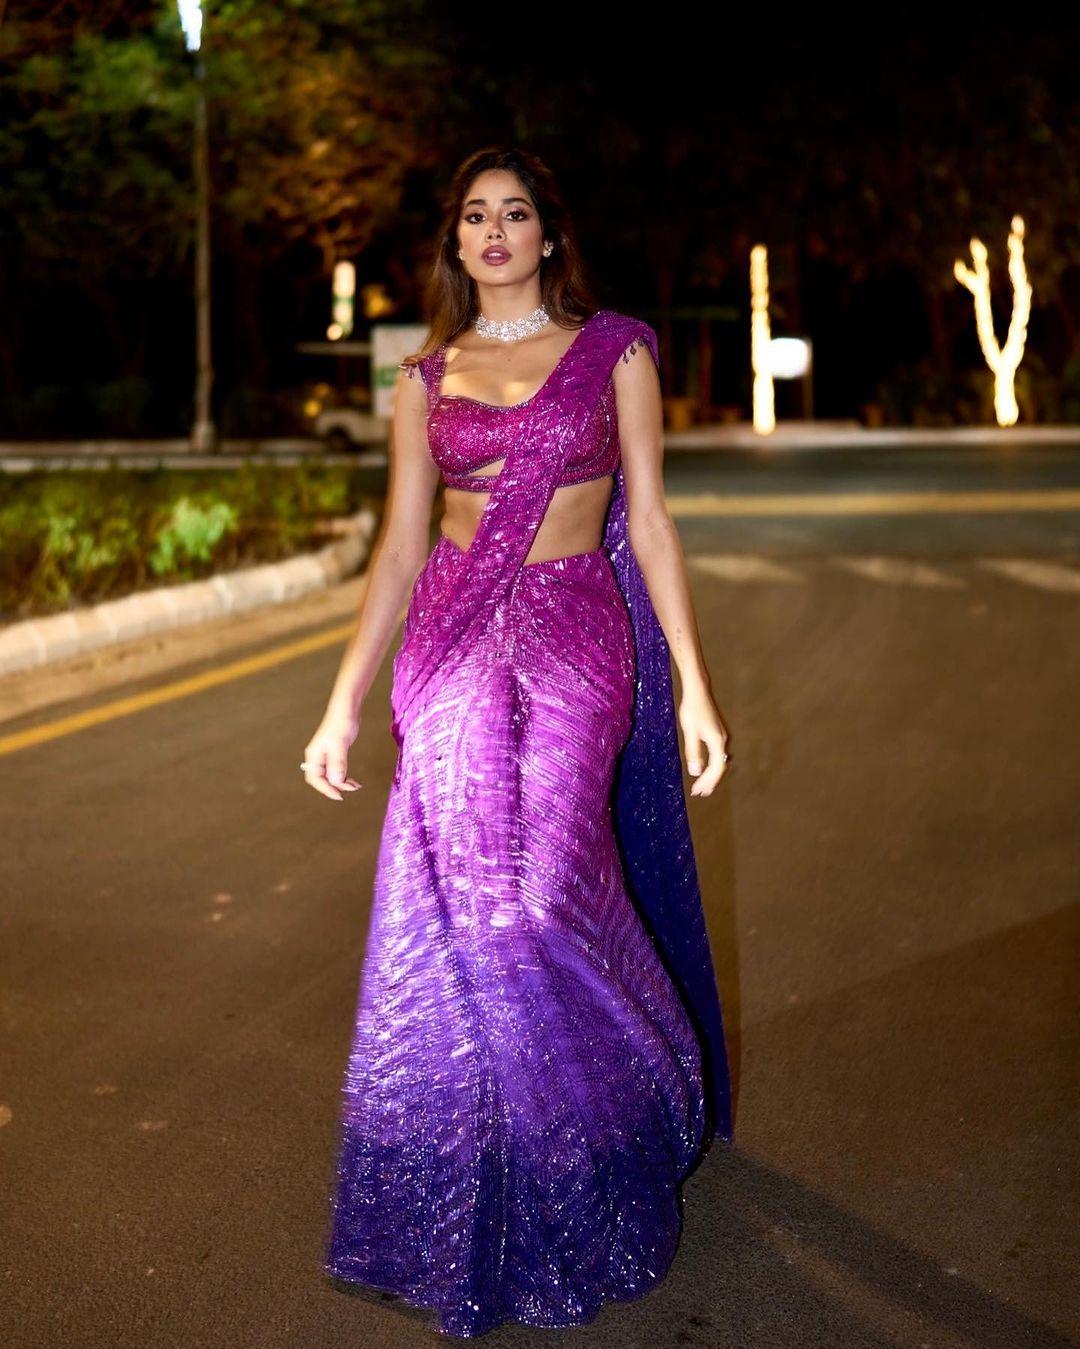 In her next outfit, she effortlessly wrapped herself in a six-yard saree that oozed grace. The stunning sequined saree had a captivating ombre pattern, transitioning from pink to purple. 